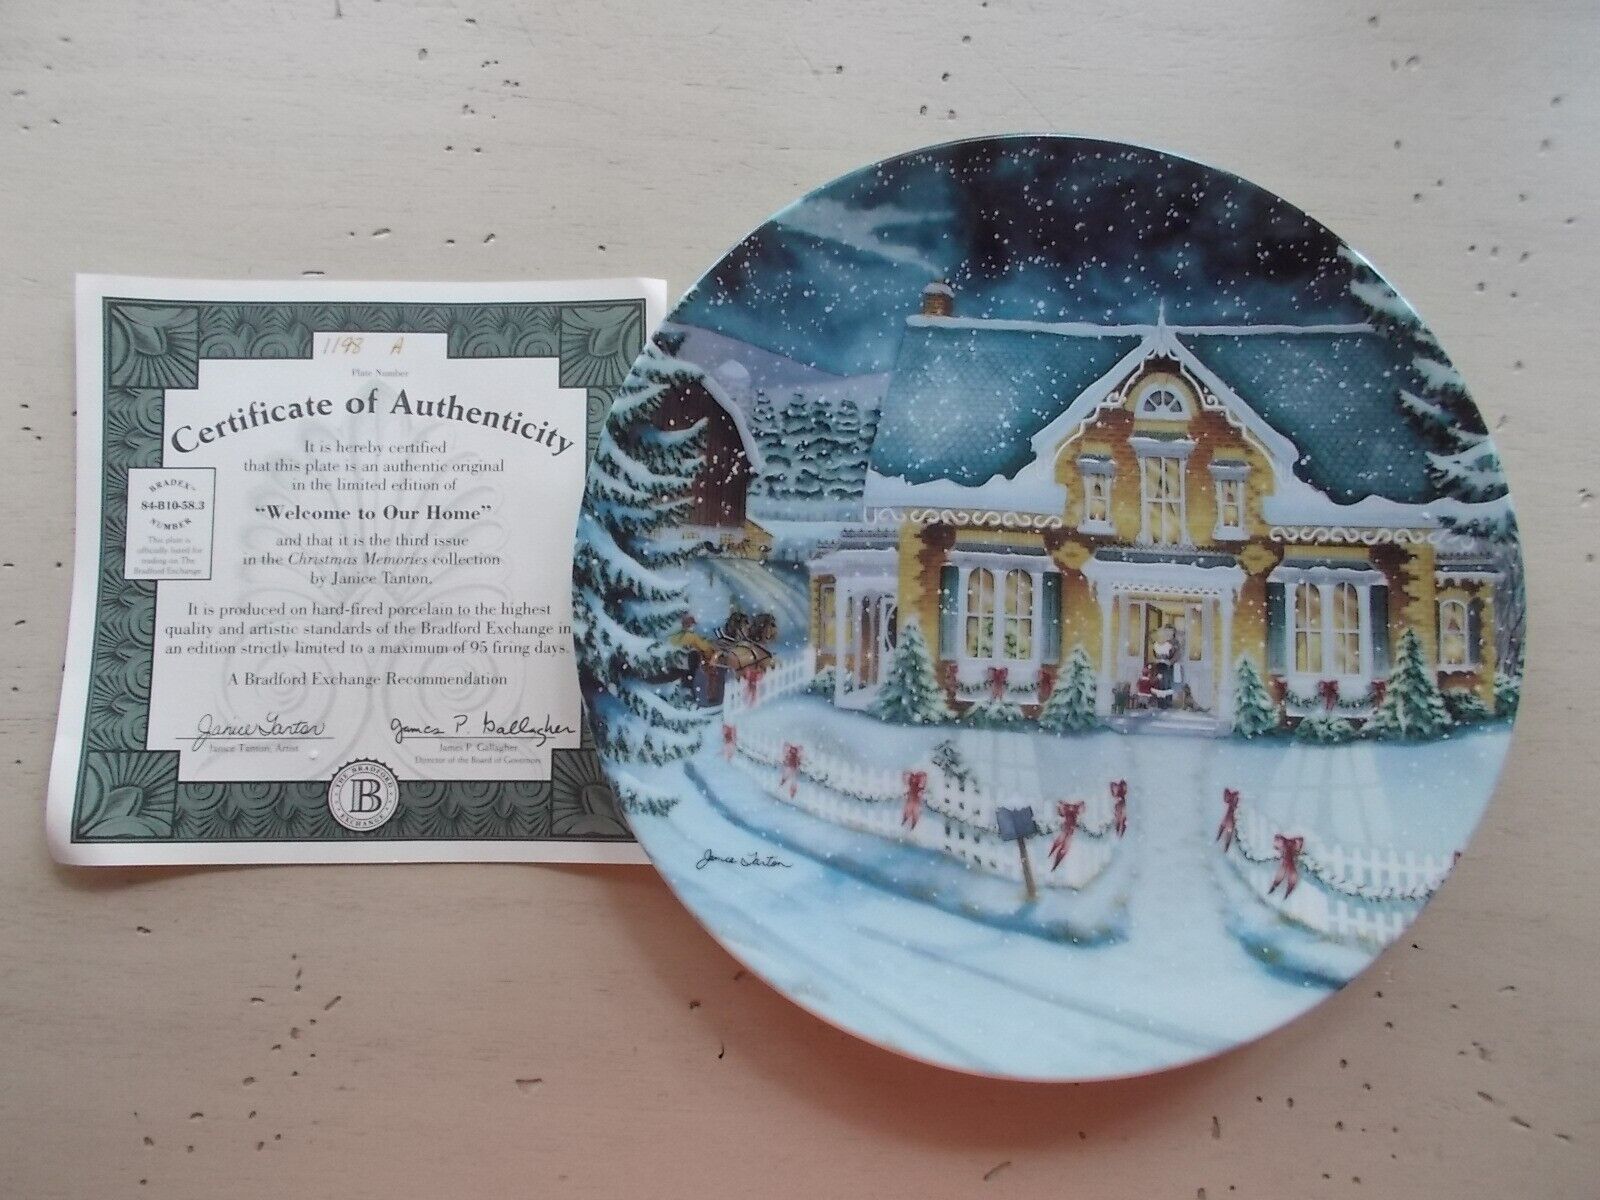 1993 Bradford LE Christmas Memories Welcome to Our Home Porcelain Plate Tanton